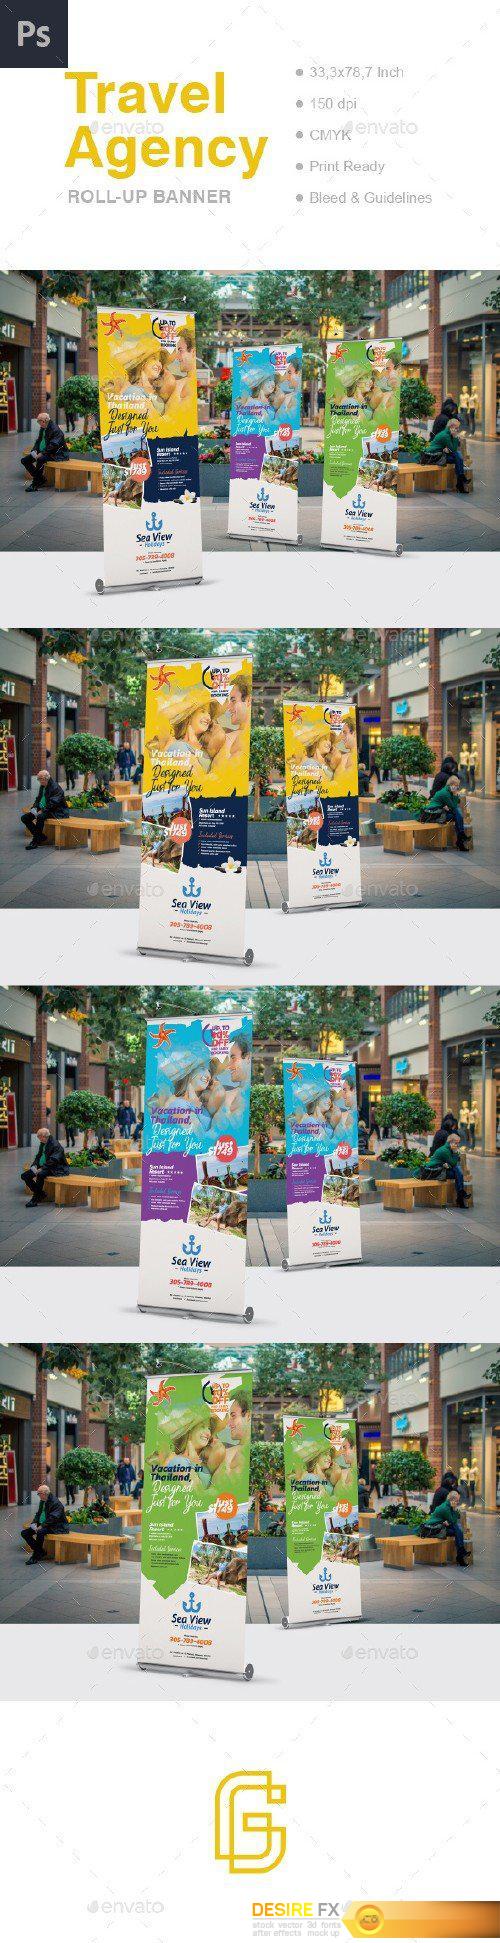 Travel Roll-Up Banner